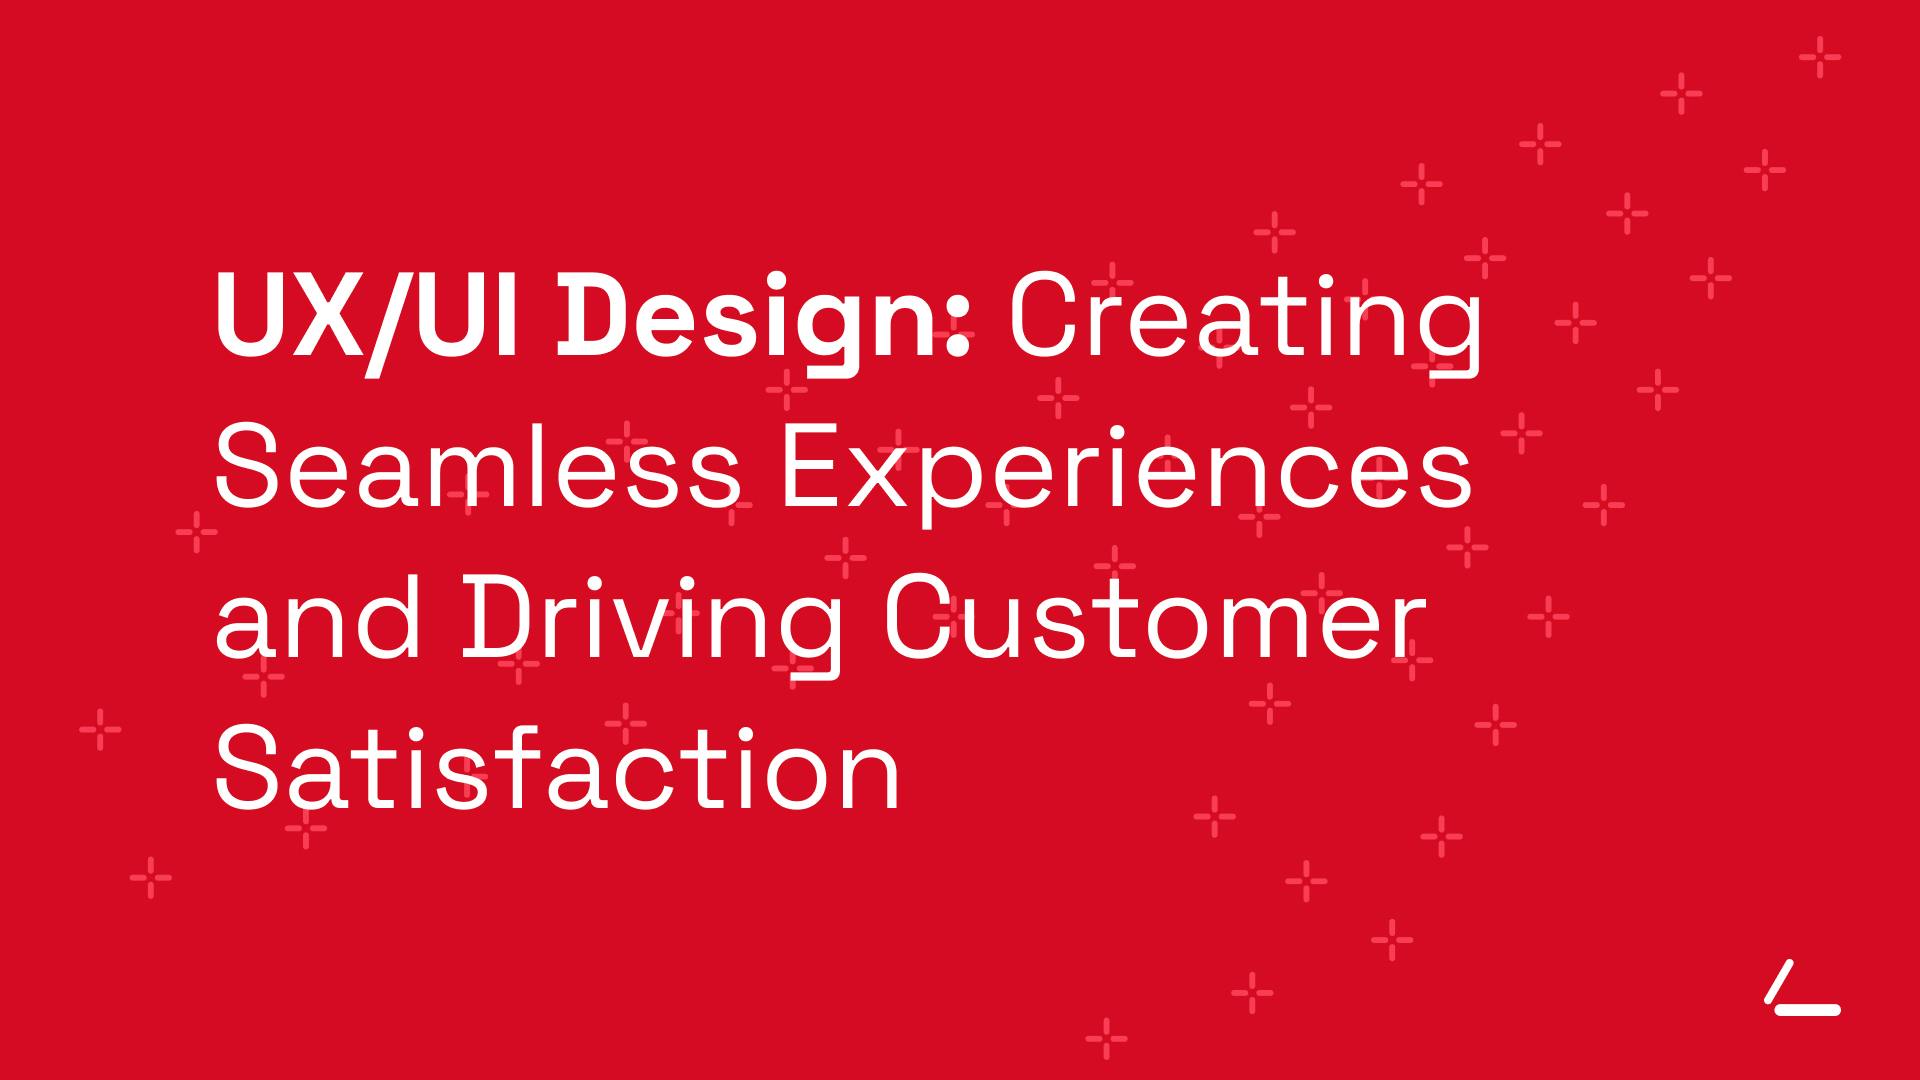 SEO Article Header - Red background with text about UX/UI Design